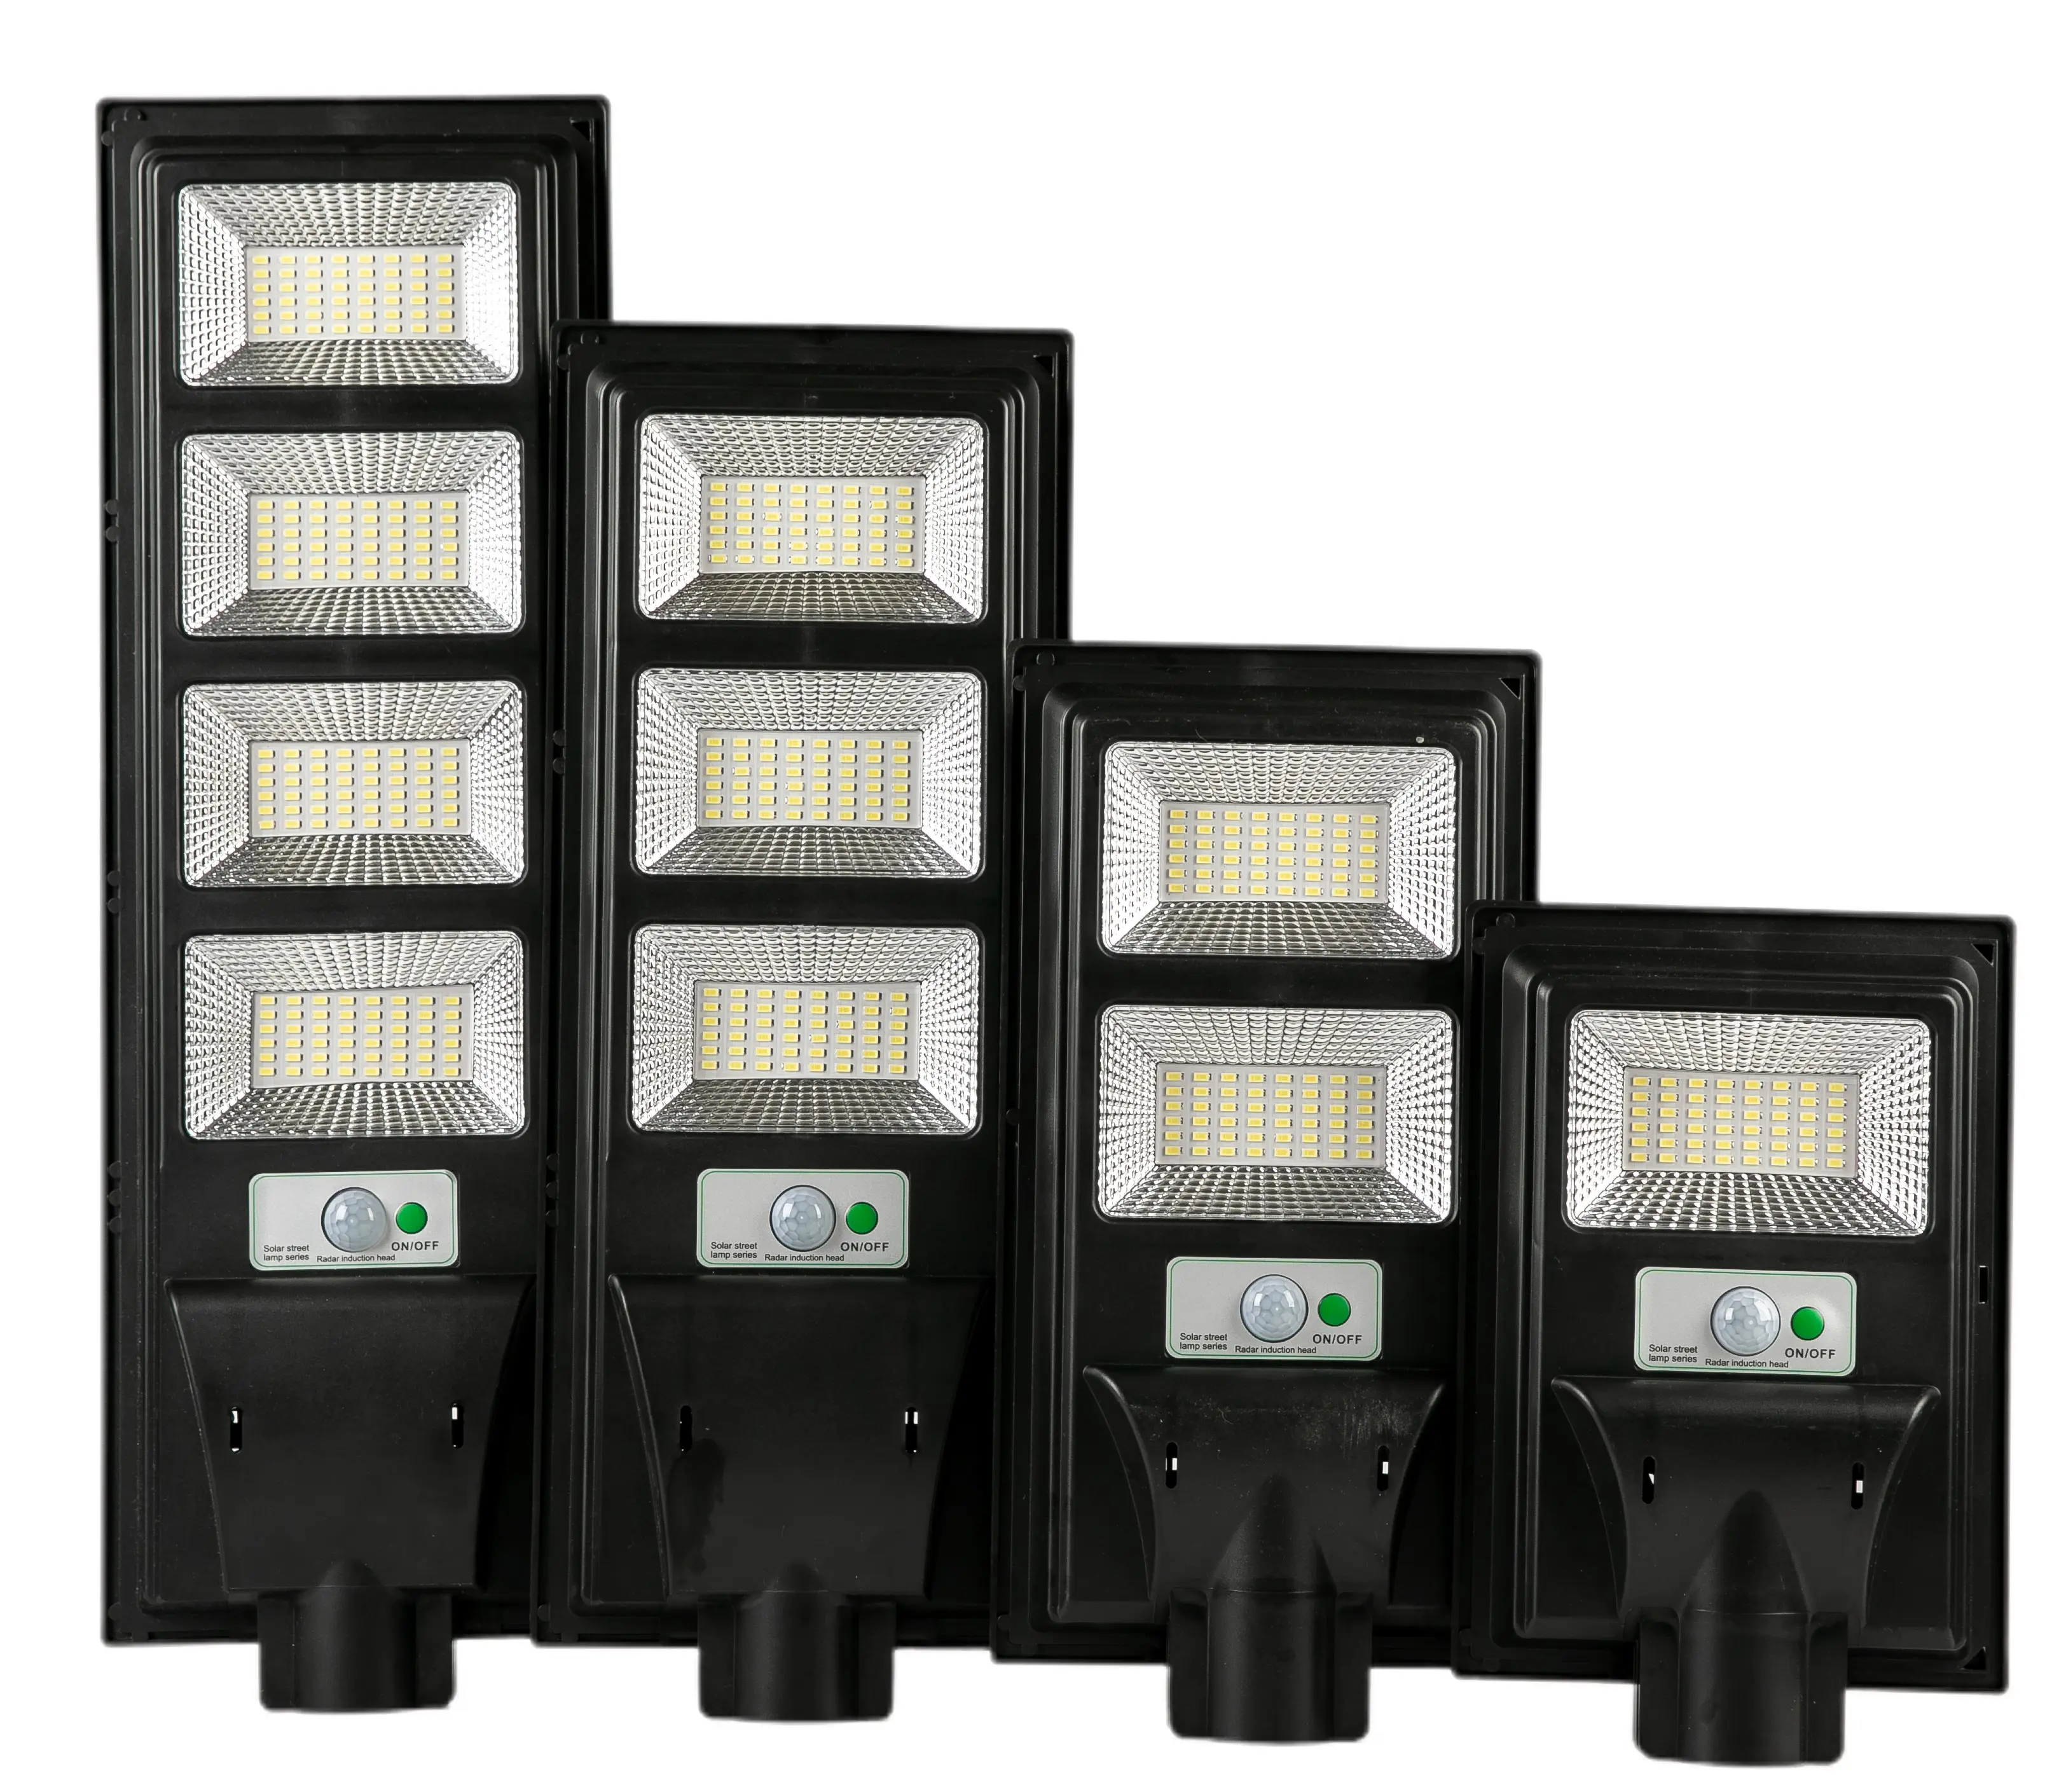 Cheap price LED garden light 100w house wall light outdoor waterproof ip 65 all in one solar street lighting for square